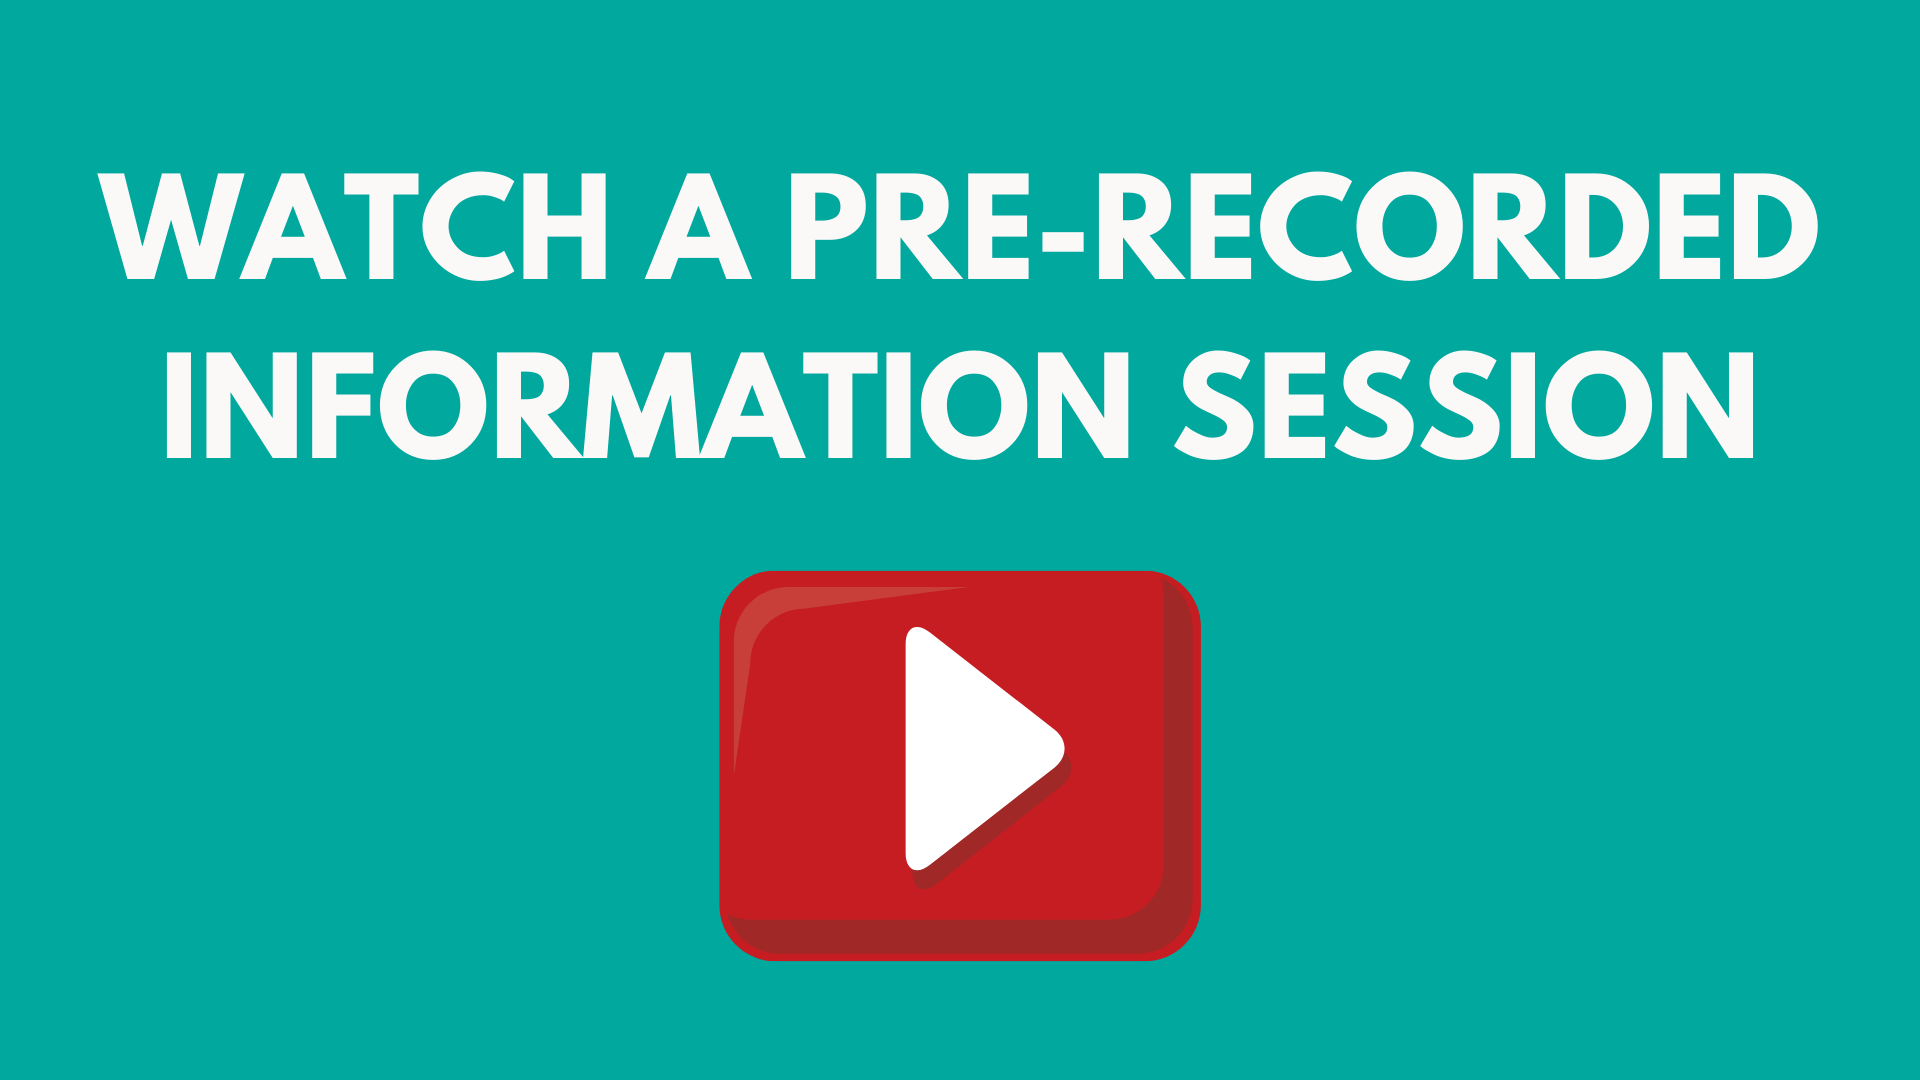 Watch a pre-recorded information session